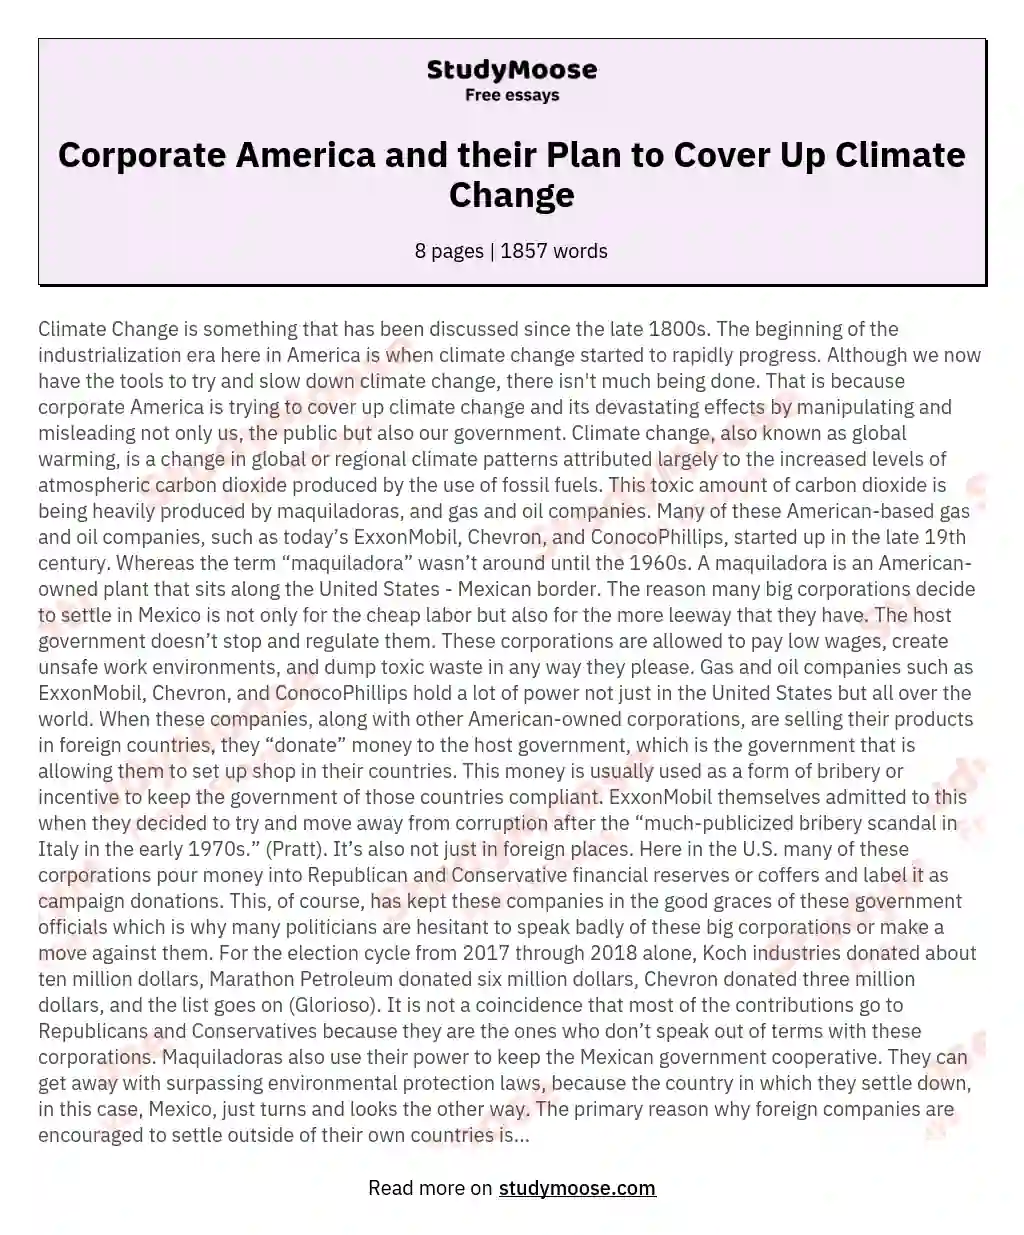 Corporate America and their Plan to Cover Up Climate Change essay